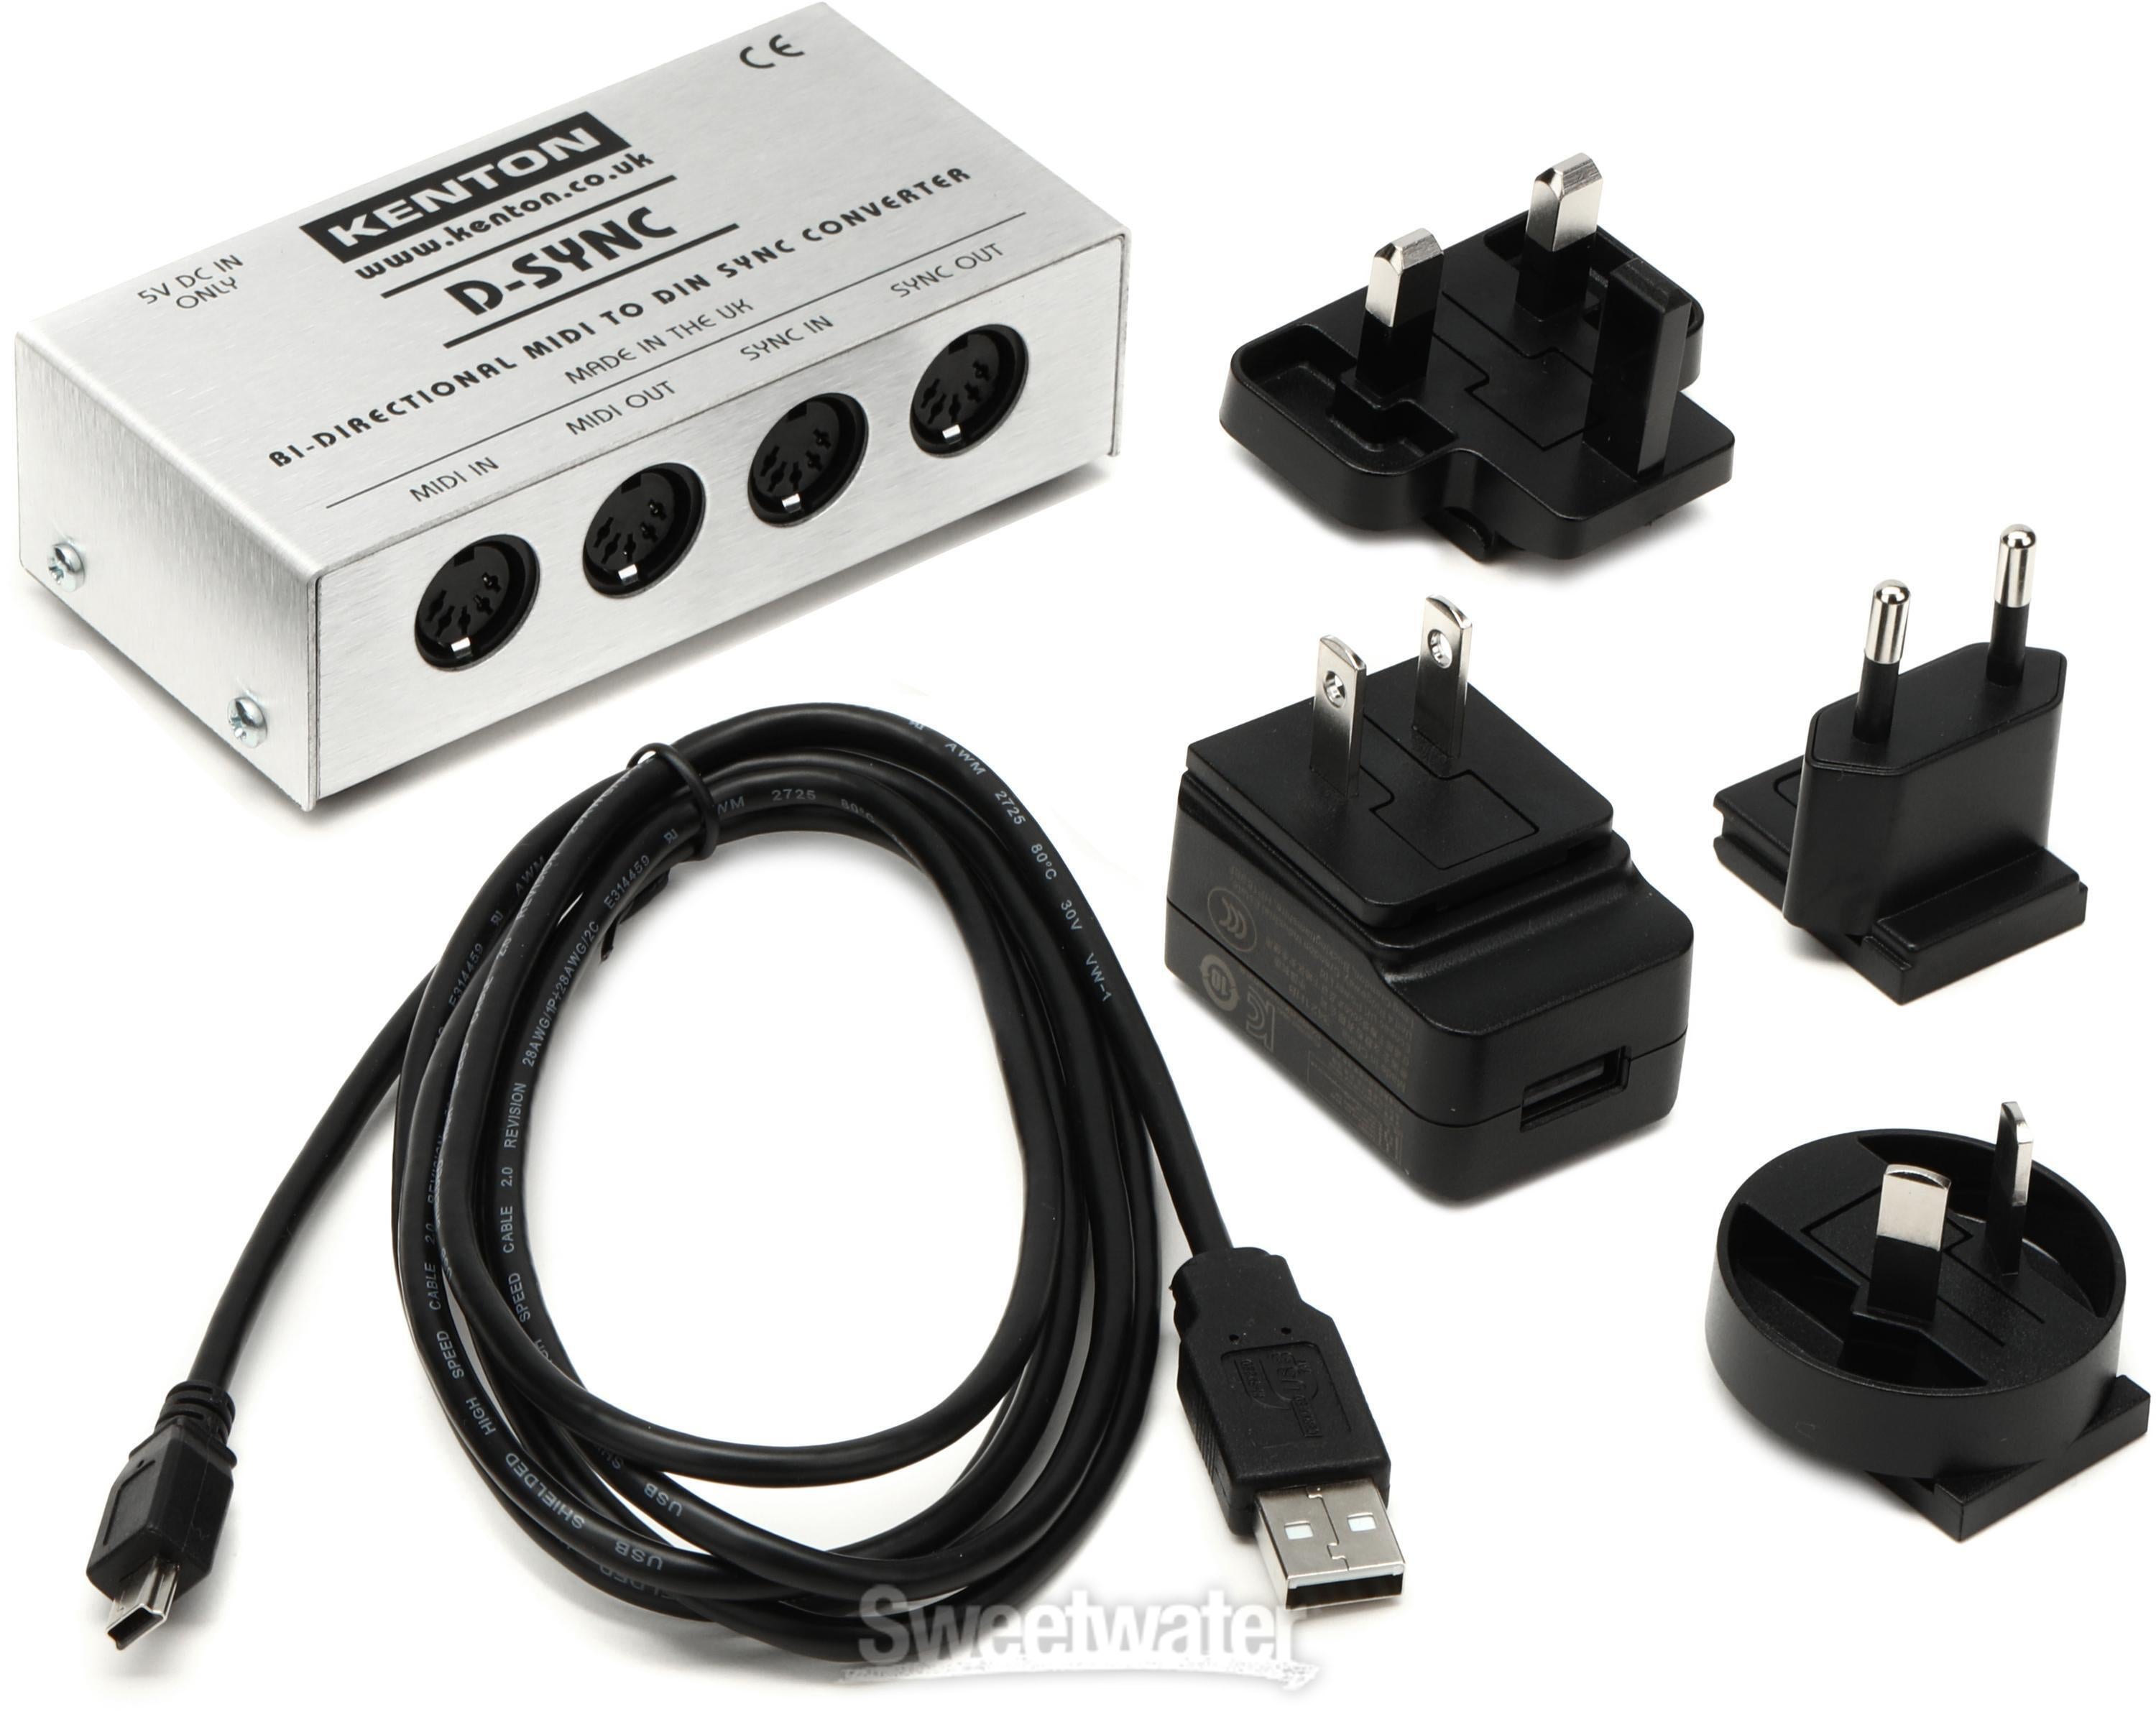 D-Sync Bi-directional MIDI to DIN Sync Converter - Sweetwater